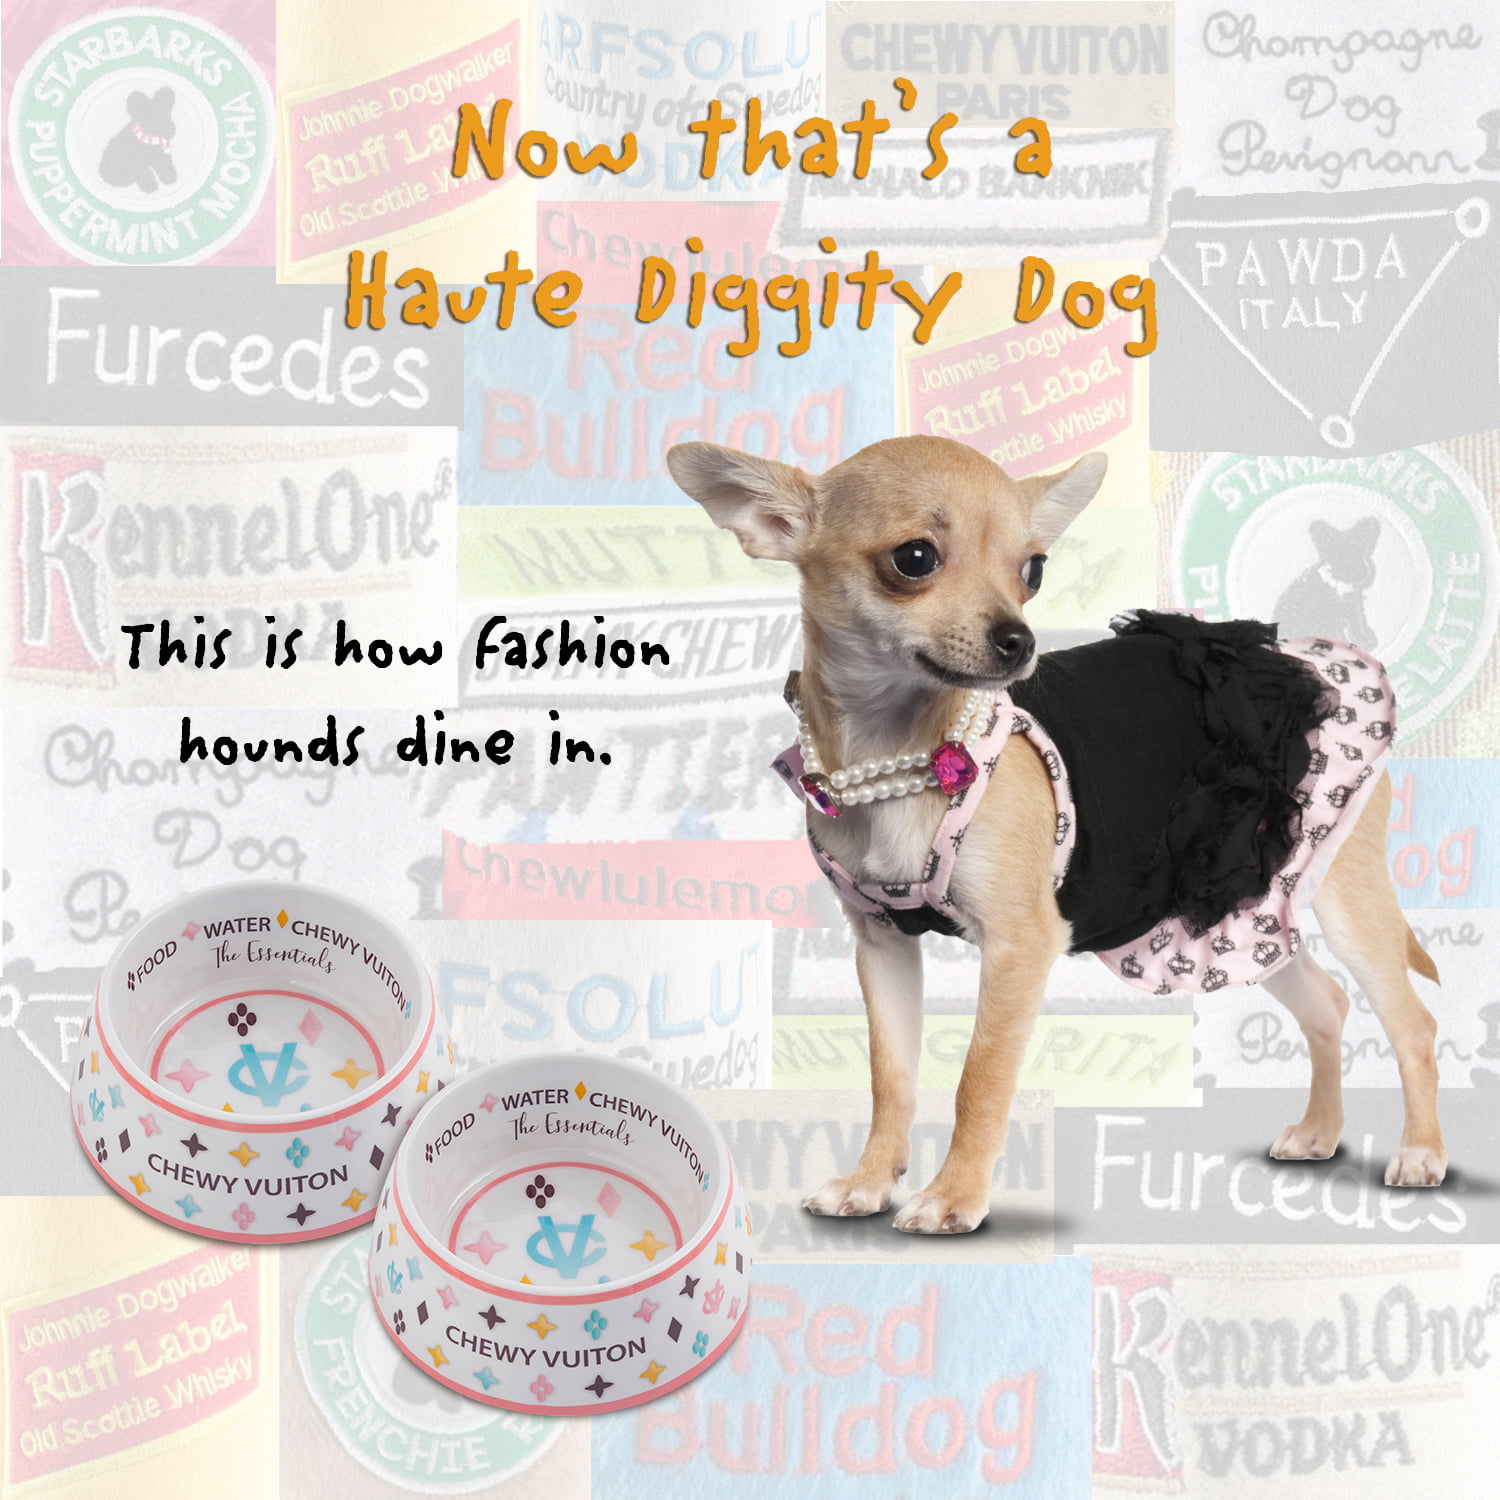  Haute Diggity Dog Bowls Collection – Set of 2 Dishwasher Safe,  Food Grade, Non-Skid, BPA Free, Chip Resistant Melamine Food & Water Bowls  with Chic, Stylish, Colorful, Fun, Unique Parody